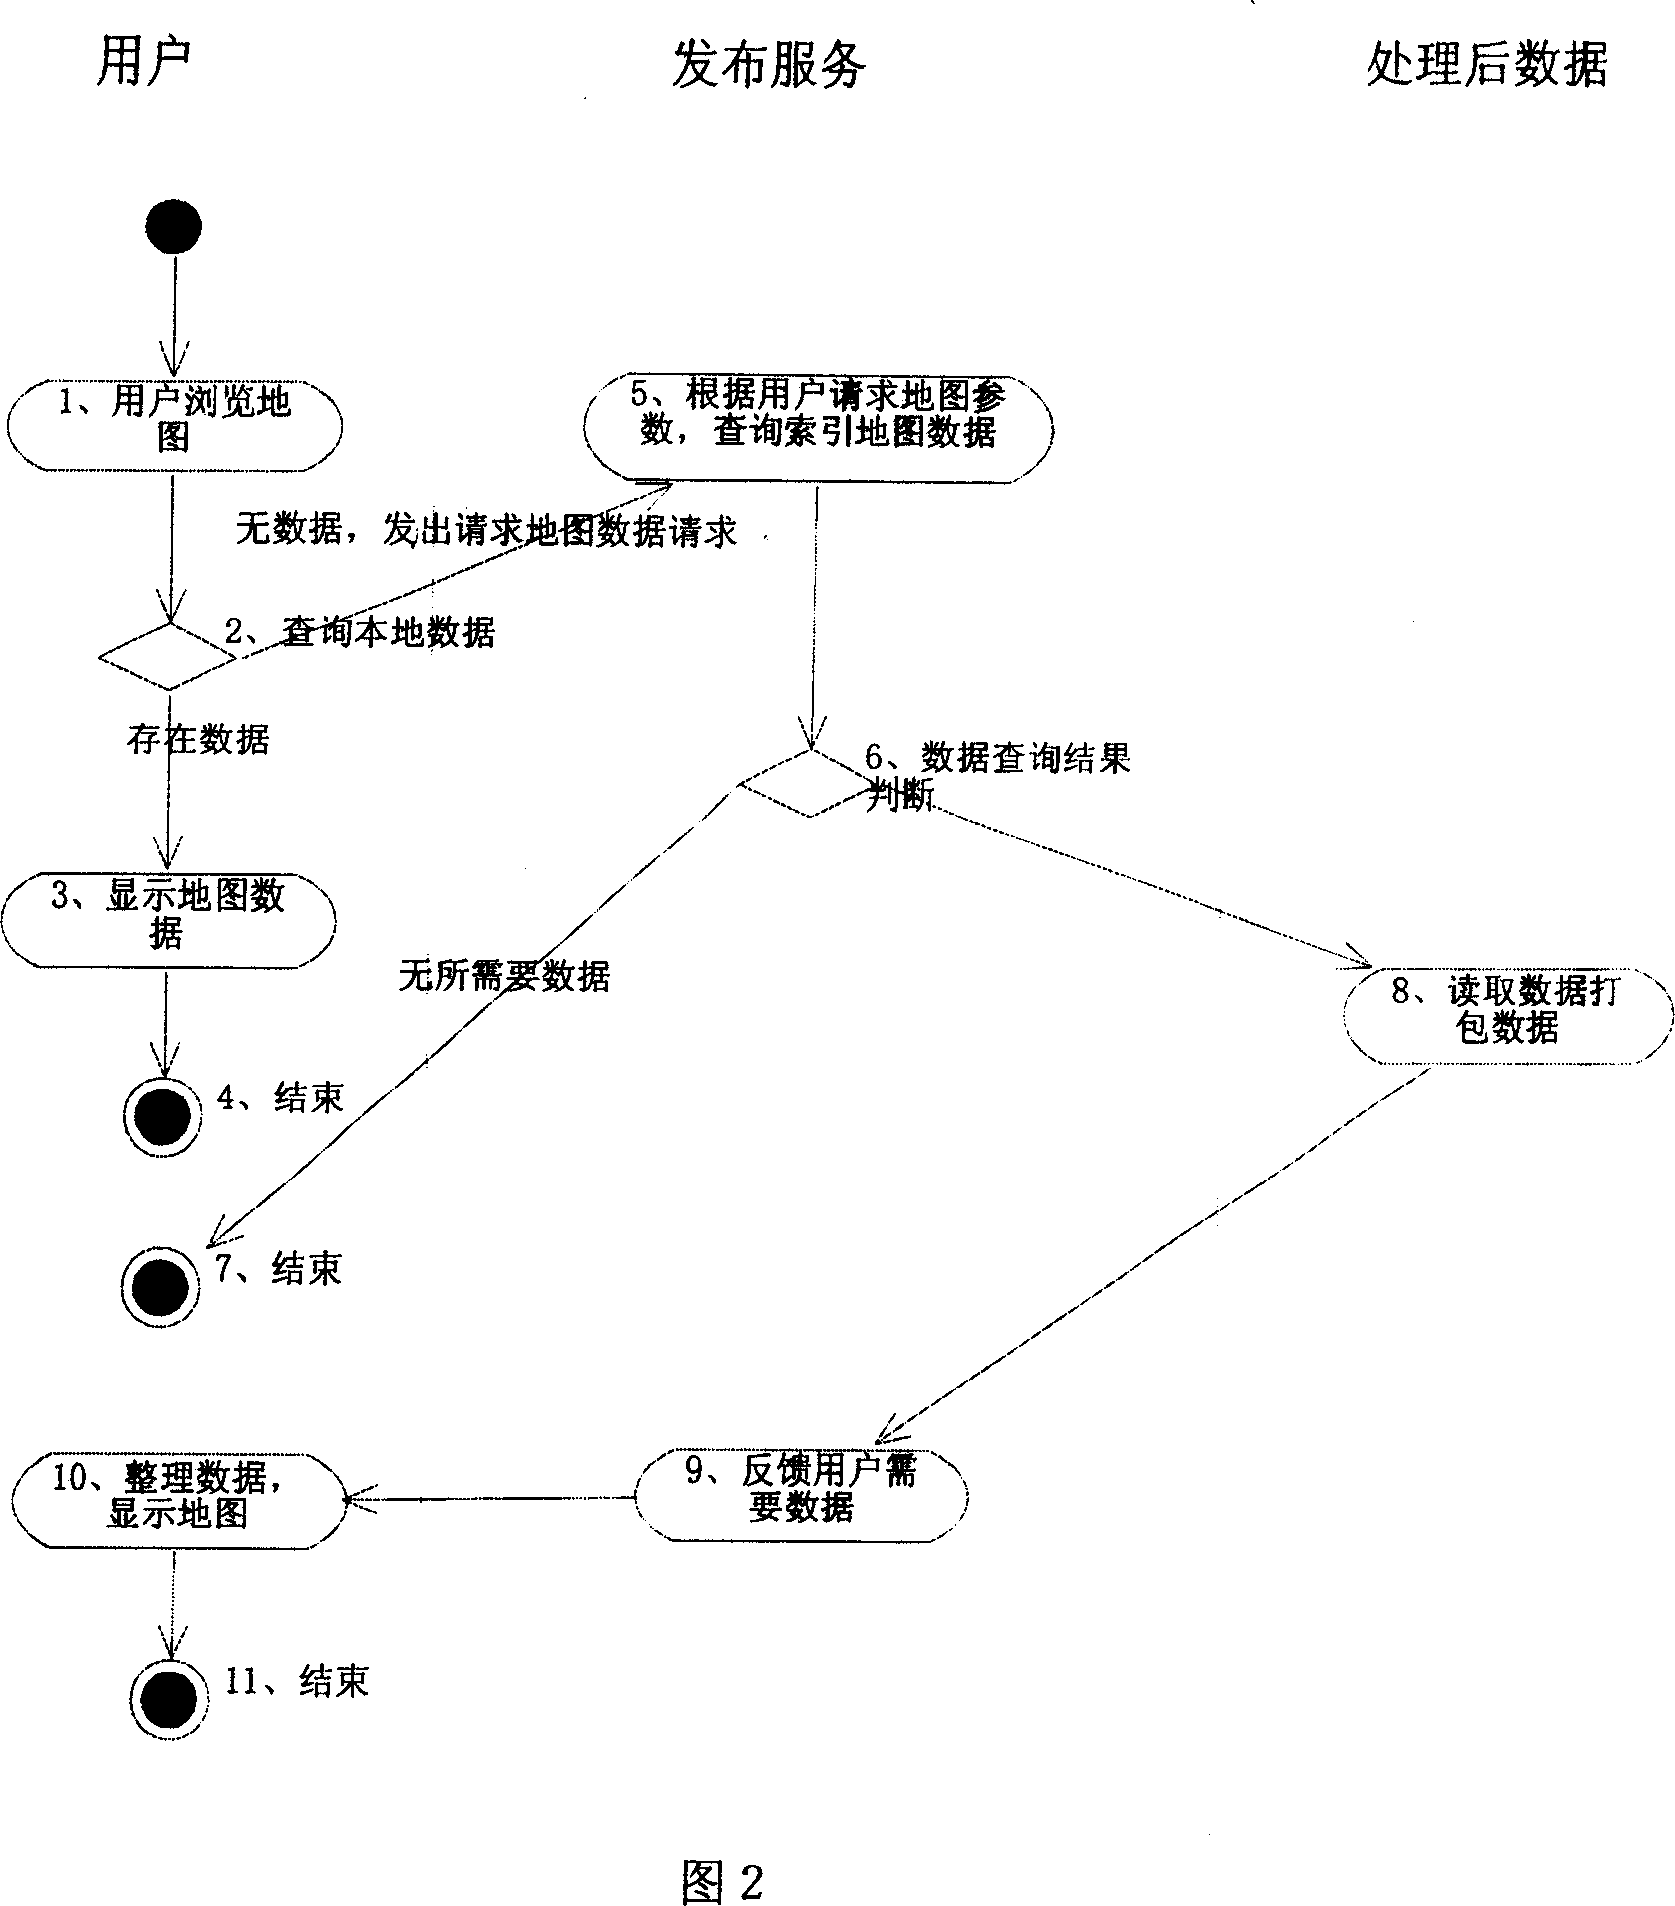 Method for publishing vector map based on interconnection network